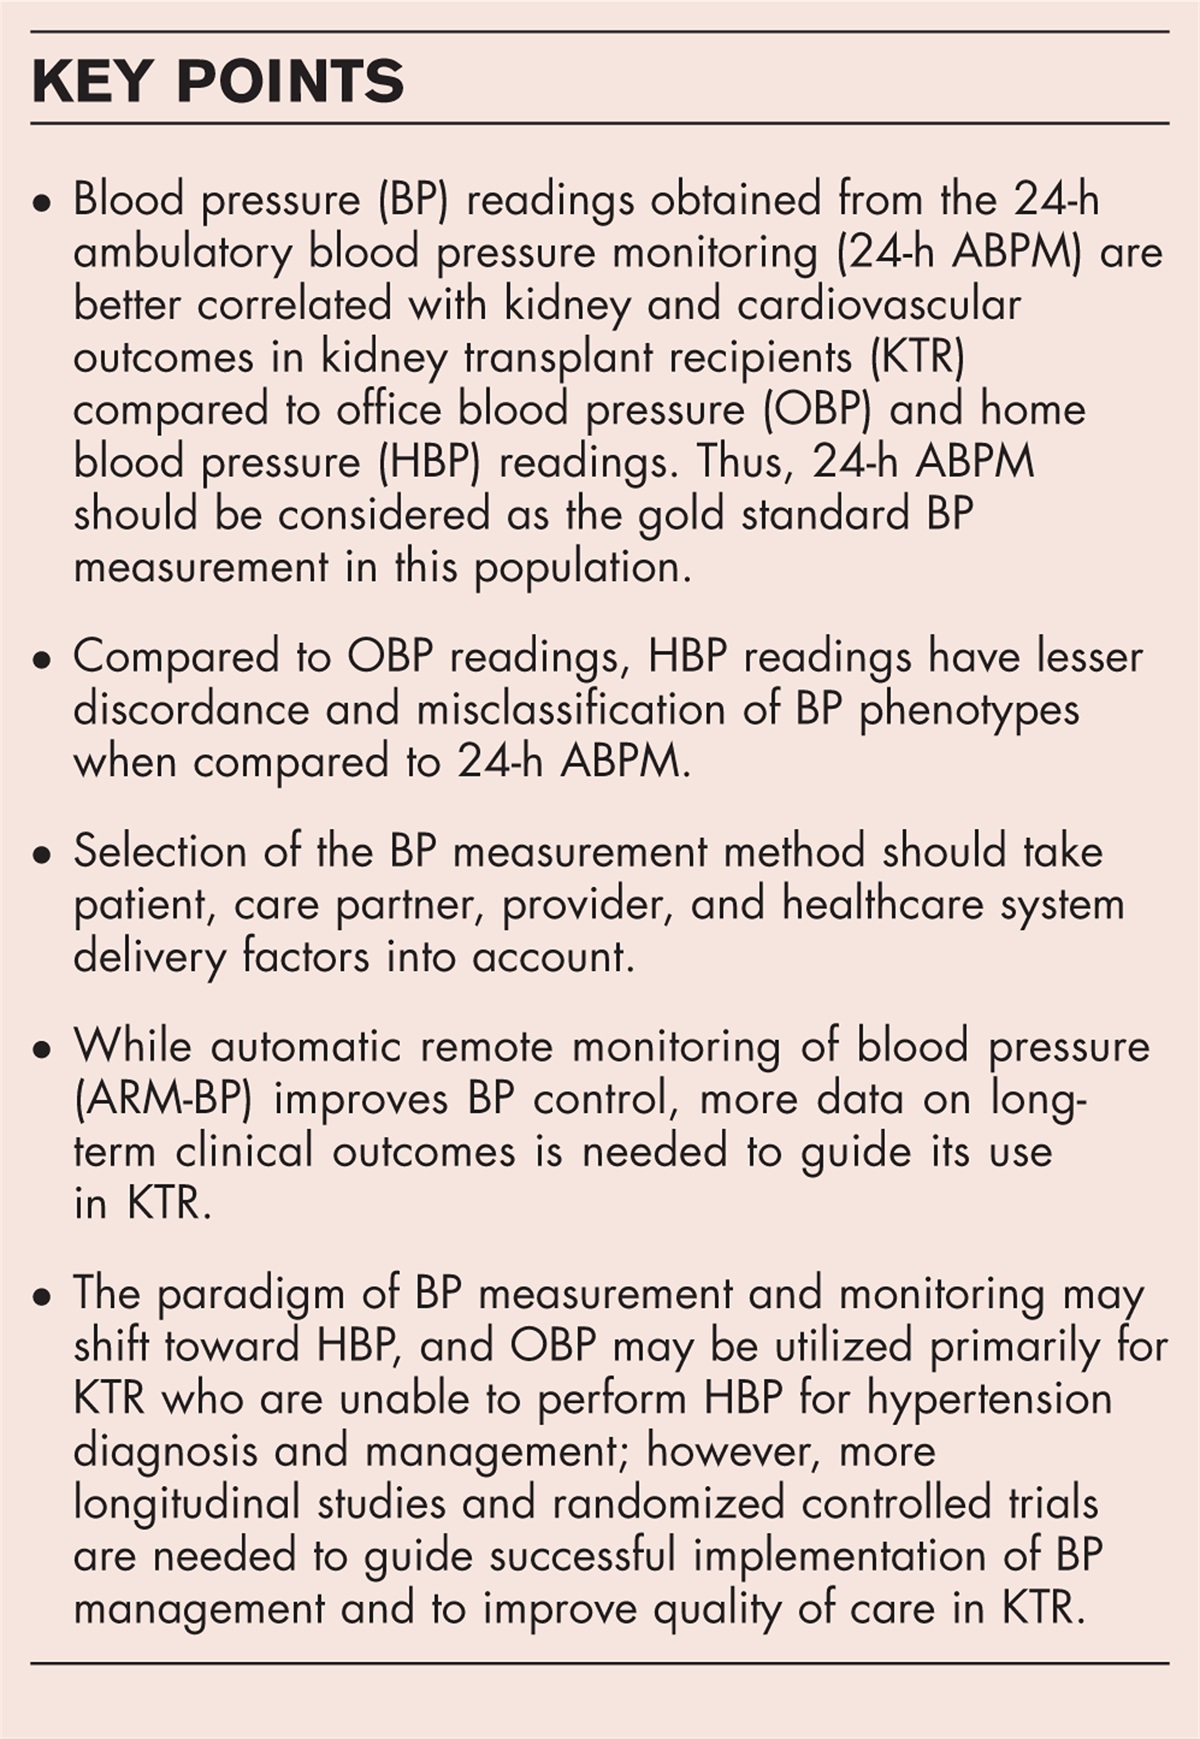 A paradigm shift from office to home-based blood pressure measurement approaches in kidney transplant recipients